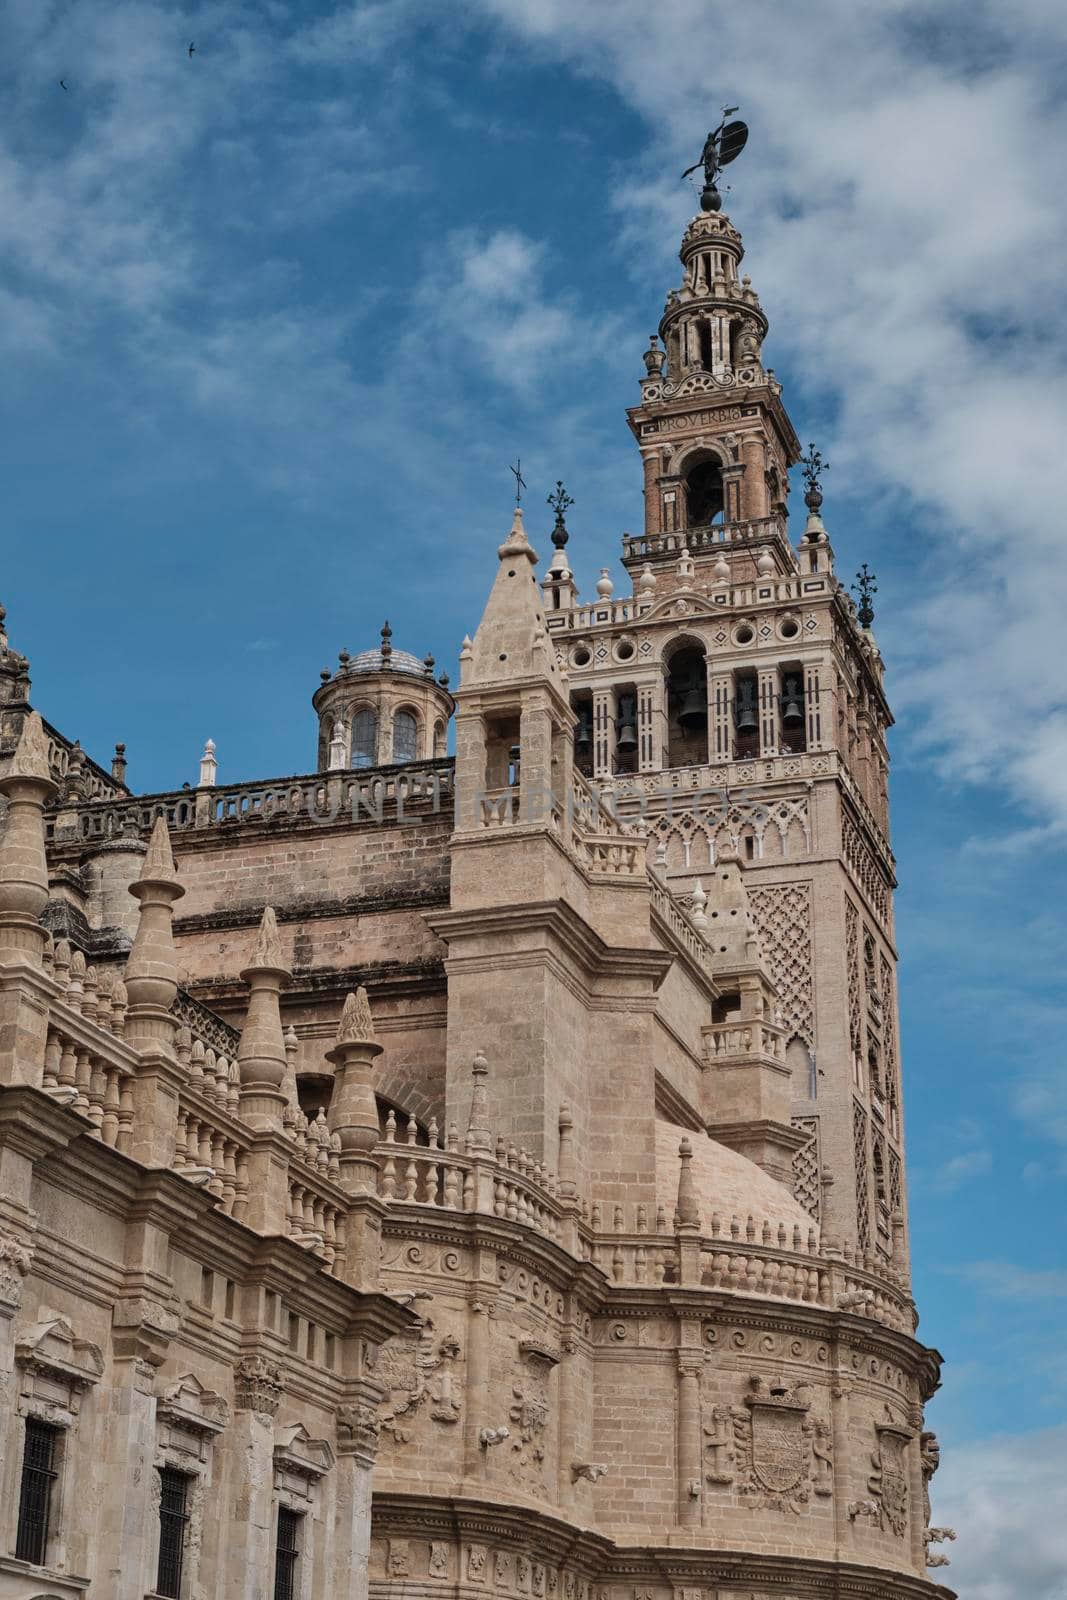 Cathedral of Saint Mary of the See (Seville Cathedral) in Seville, Andalusia, Spain in a sunny and cloudy day